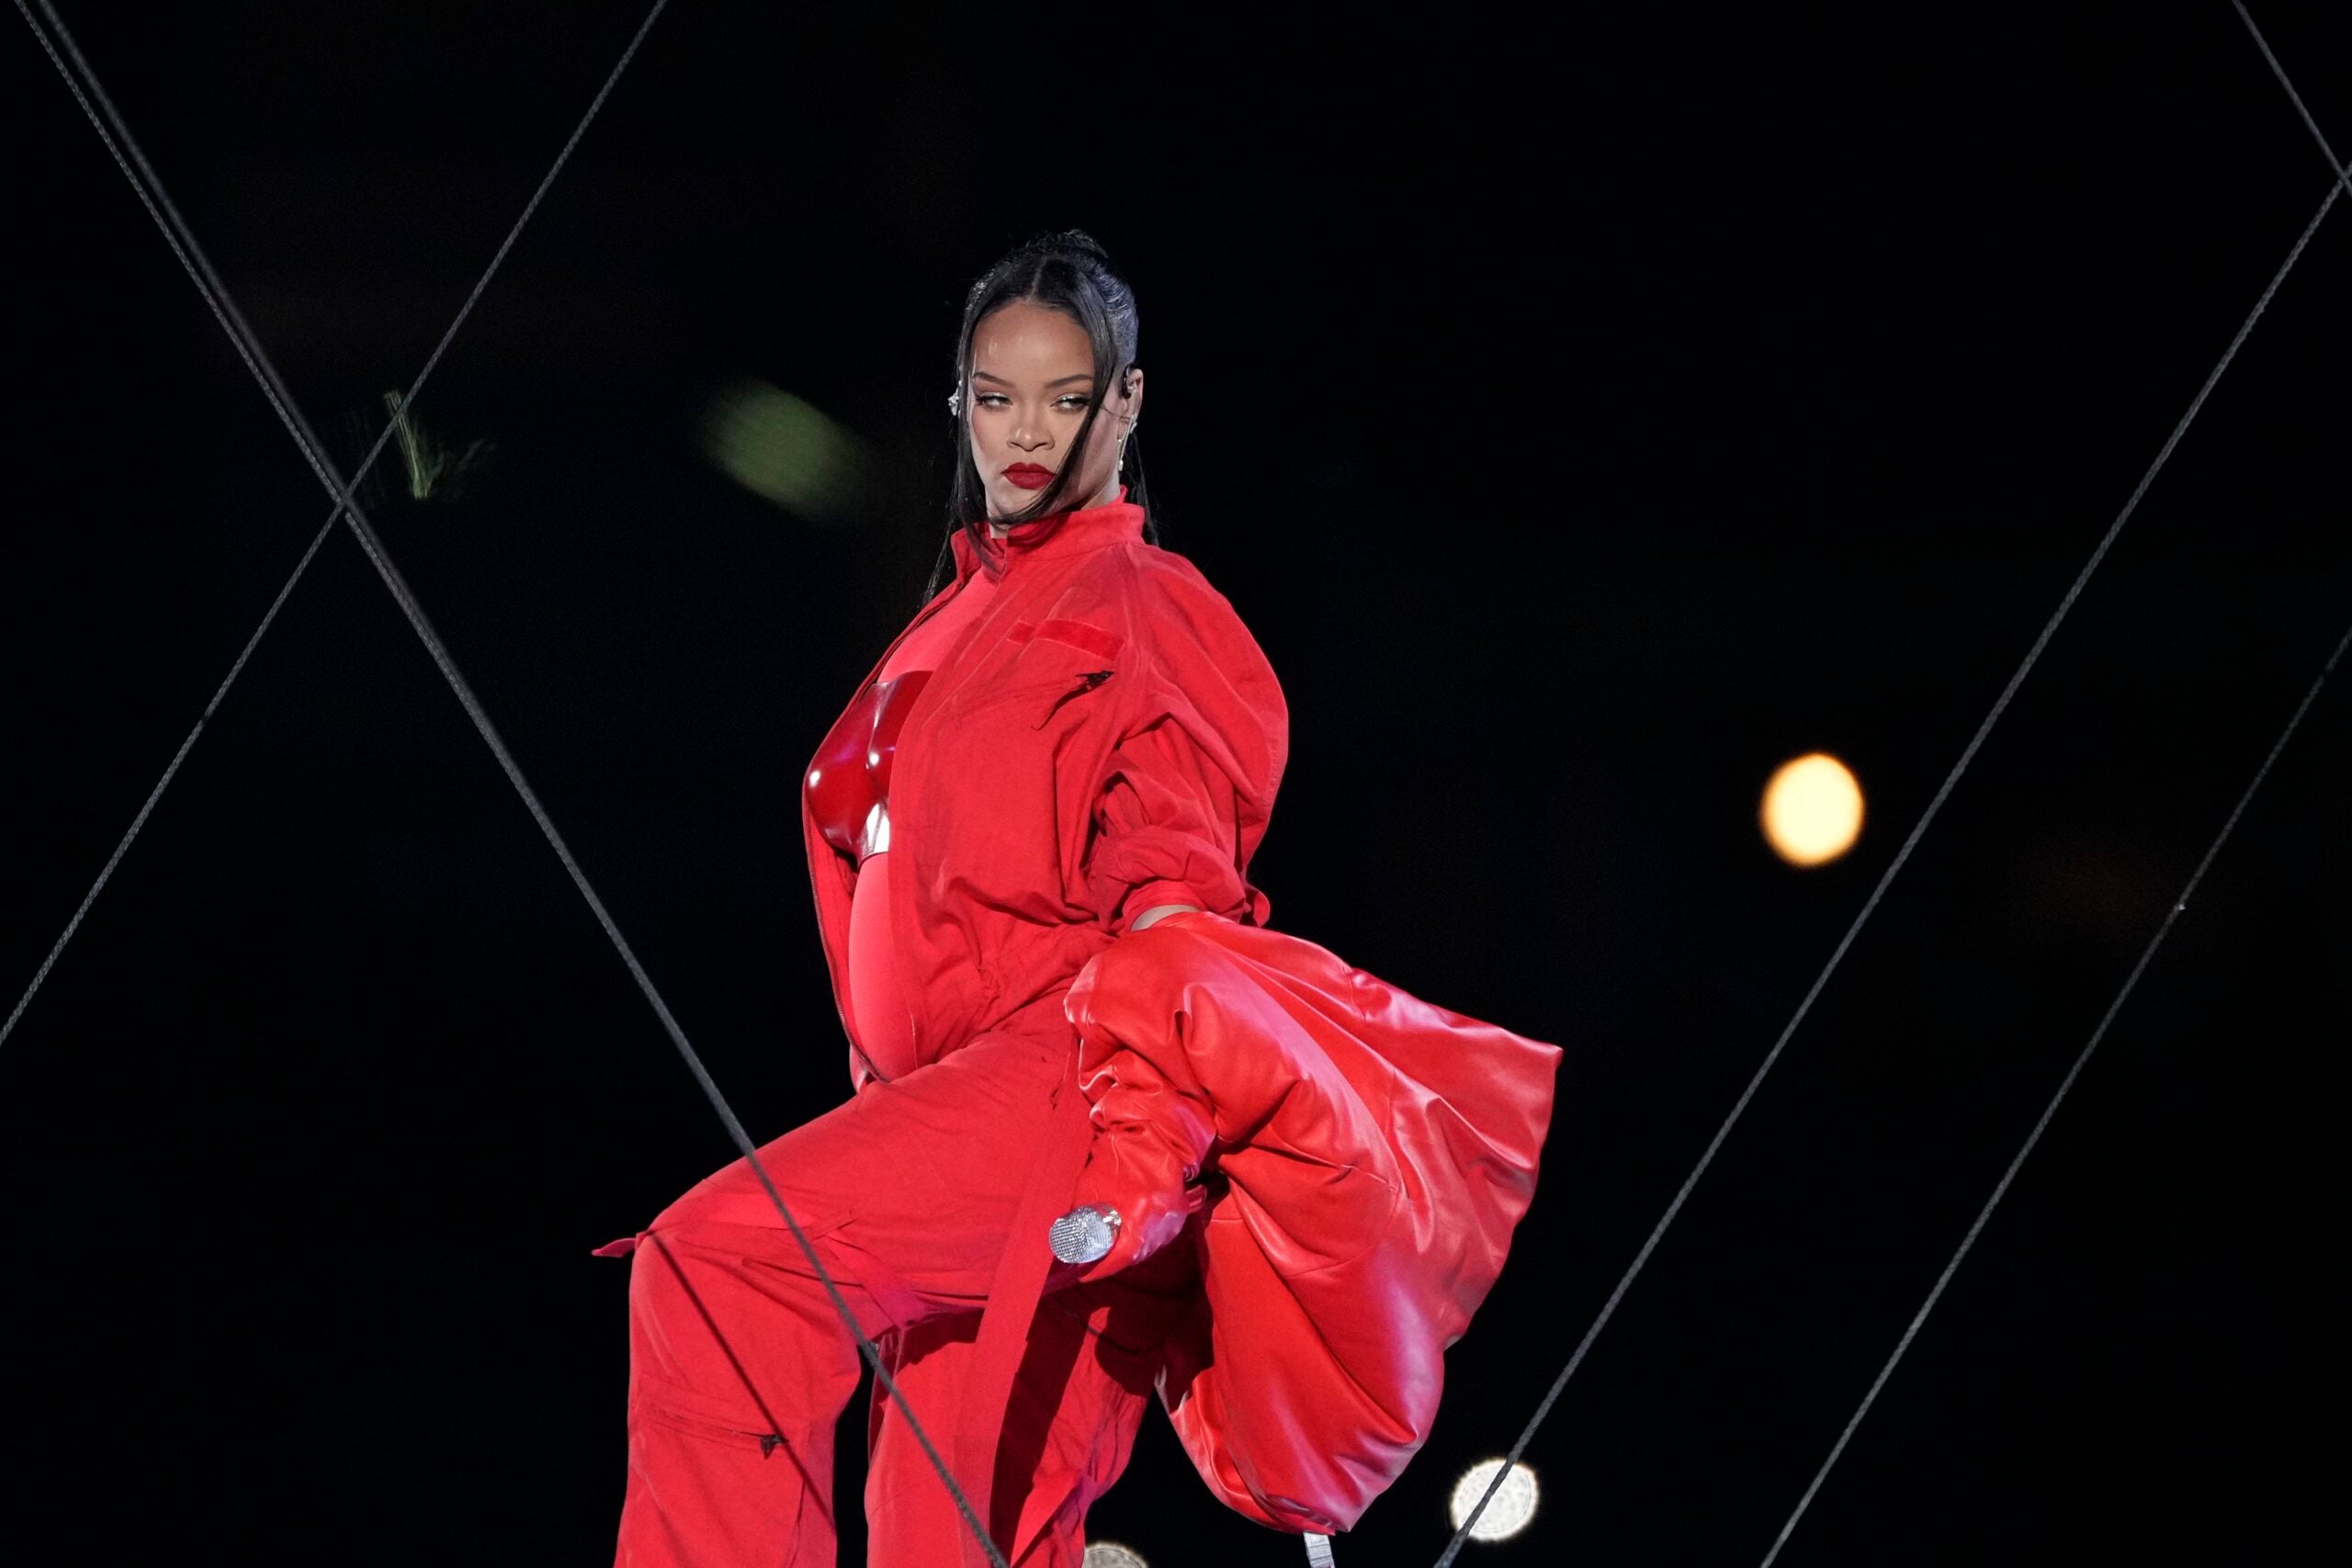 Rihanna performs during the halftime show at the NFL Super Bowl 57 football game between the Kansas City Chiefs and the Philadelphia Eagles, Sunday, Feb. 12, 2023, in Glendale, Ariz.